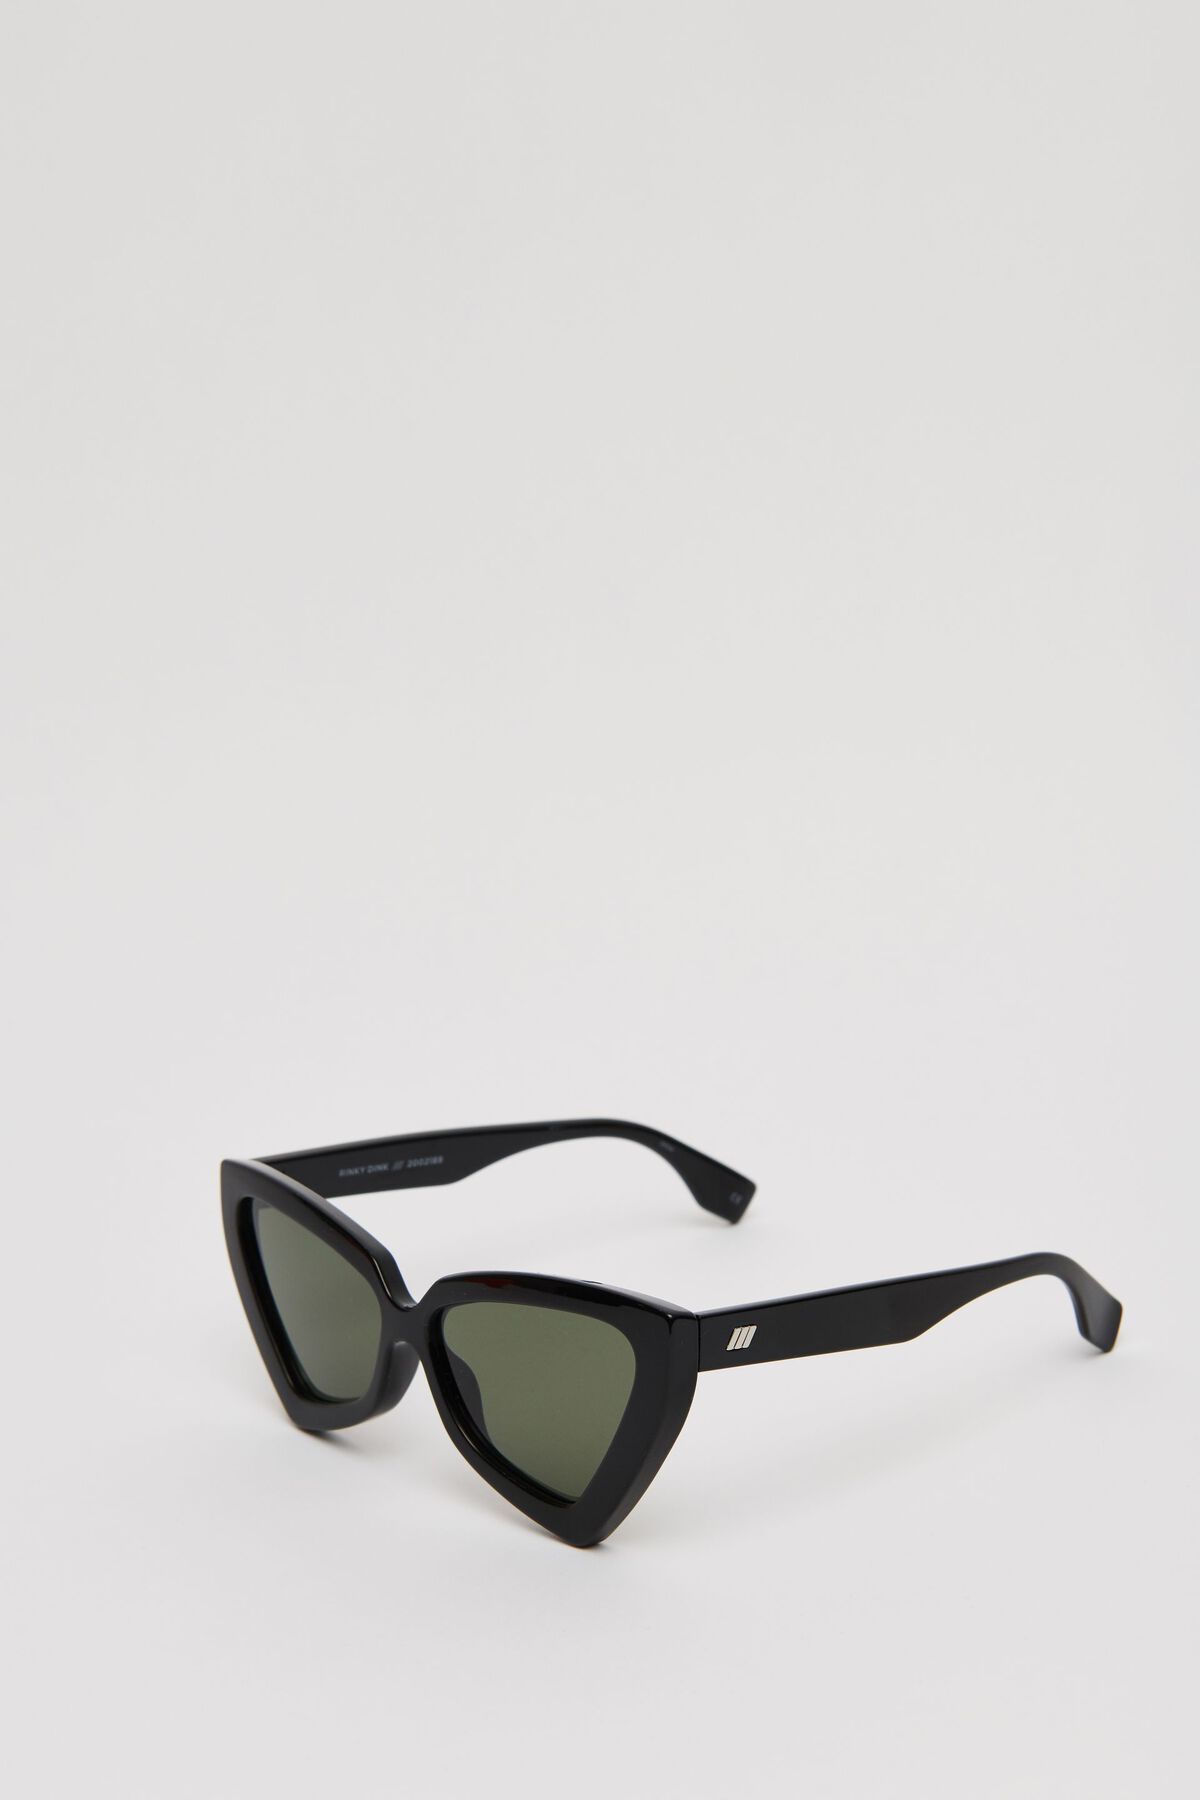 Dynamite LE SPECS | Rinky Dink Sunglasses. 6